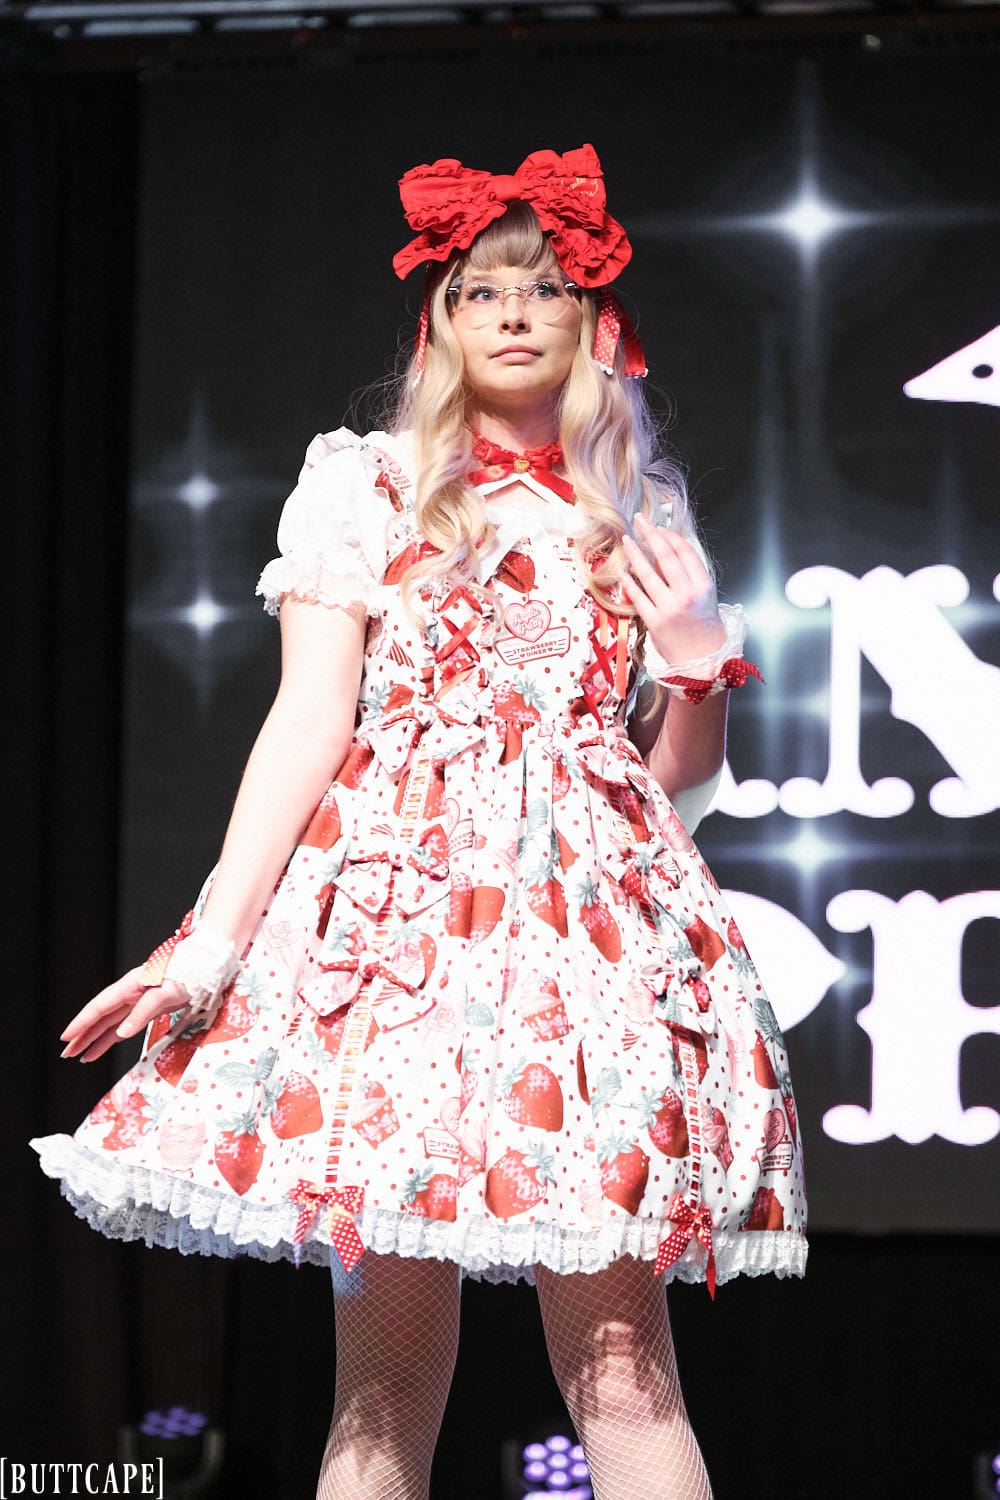 Model 2 wearing white an red strawberry sweet lolita dress, fishnet tights and black shoes - half body 2.